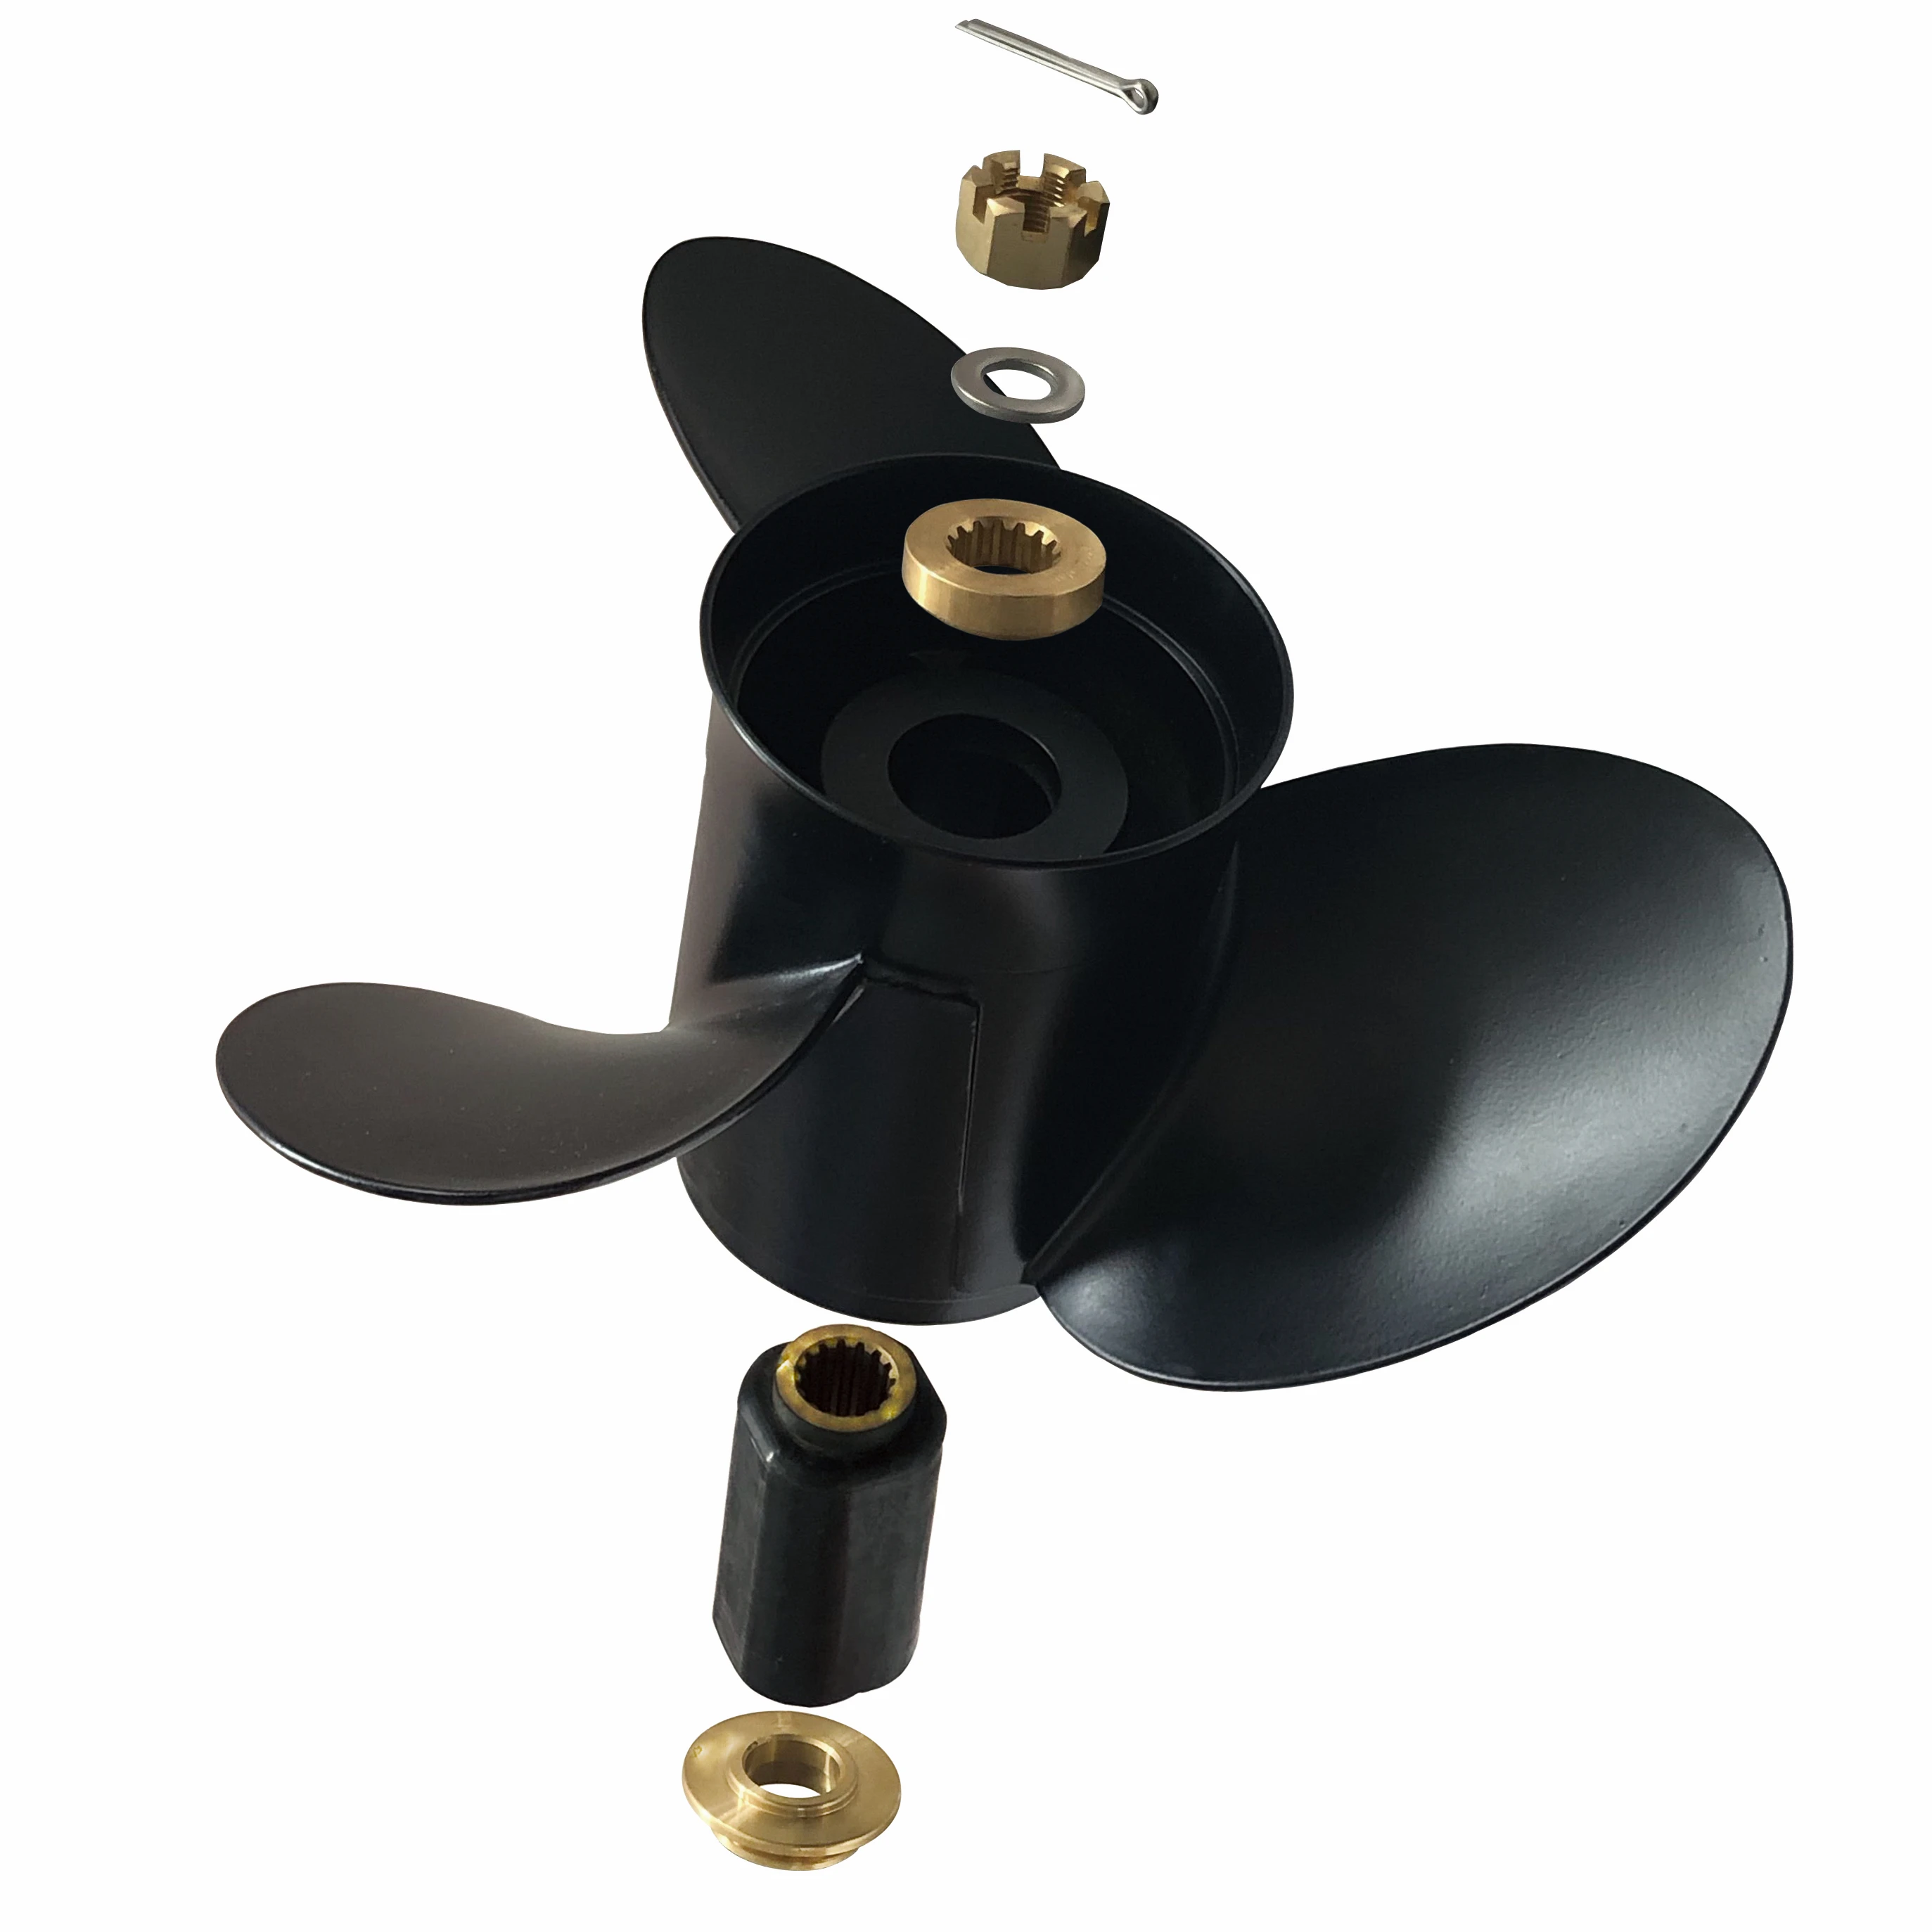 13 1/4x17 for Parsun aluminium propellers 15 teeth 50-130hp Interchangeable hub with hub kits boat accessories marine propellers